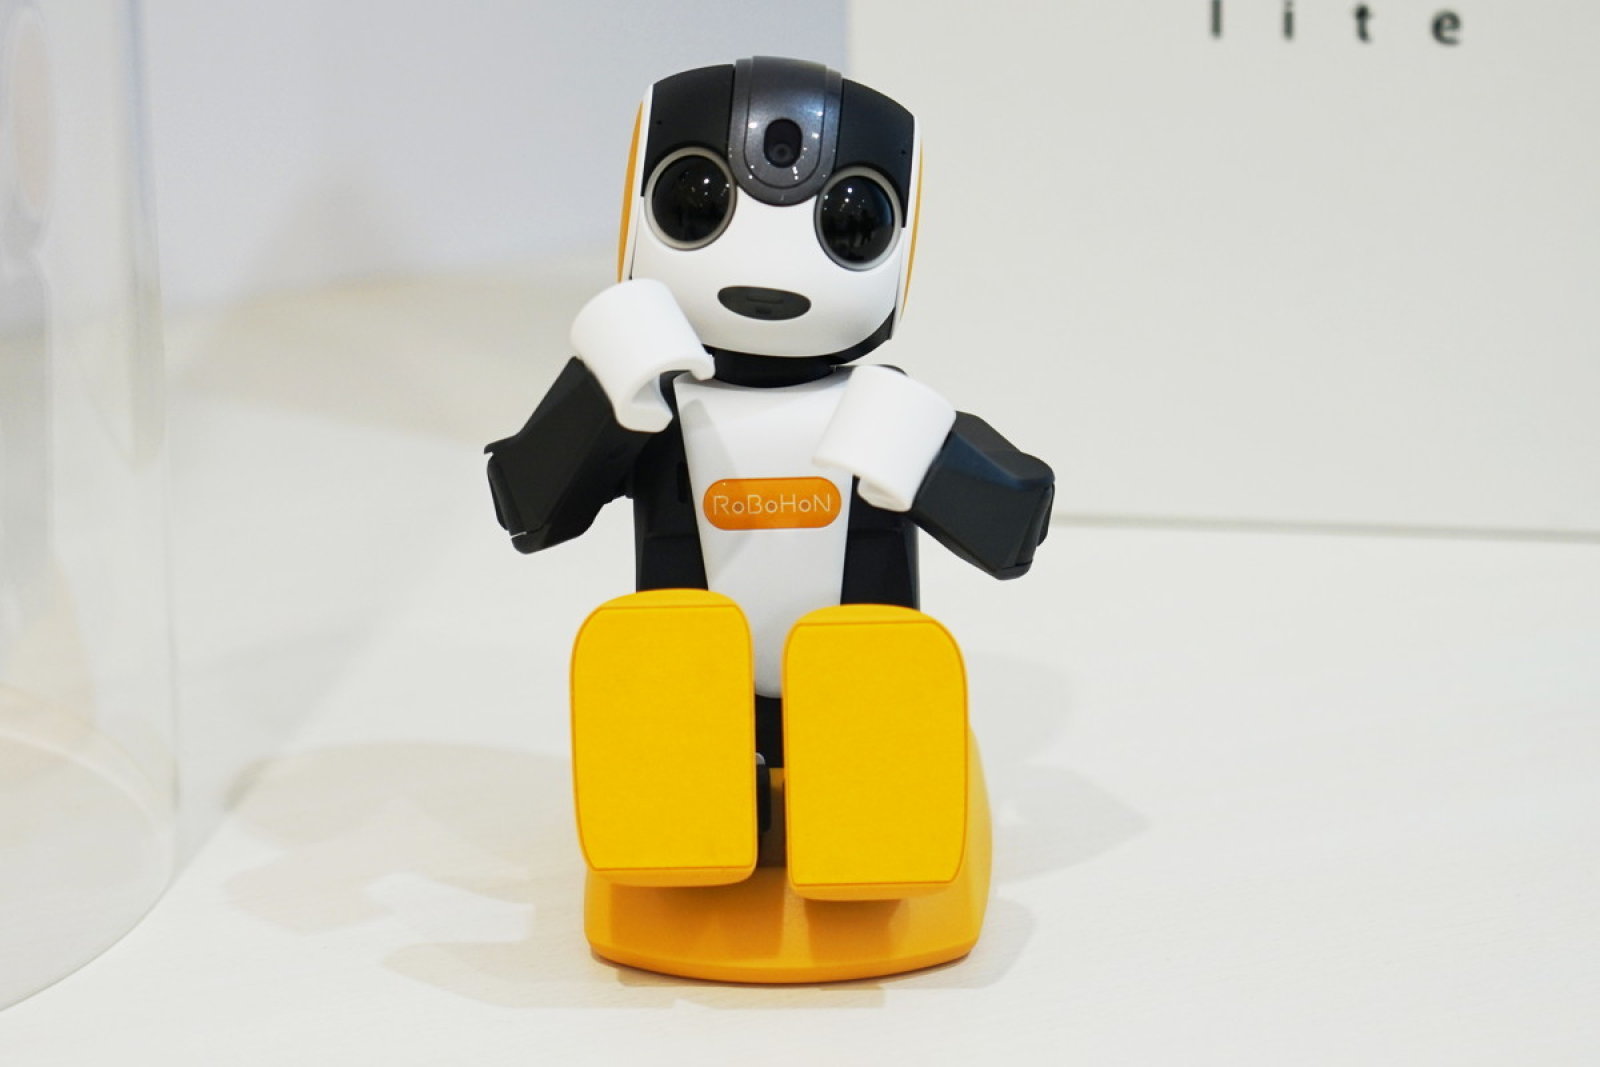 New RoBoHon Robot by Sharp: An Adorable Smartphone in Disguise